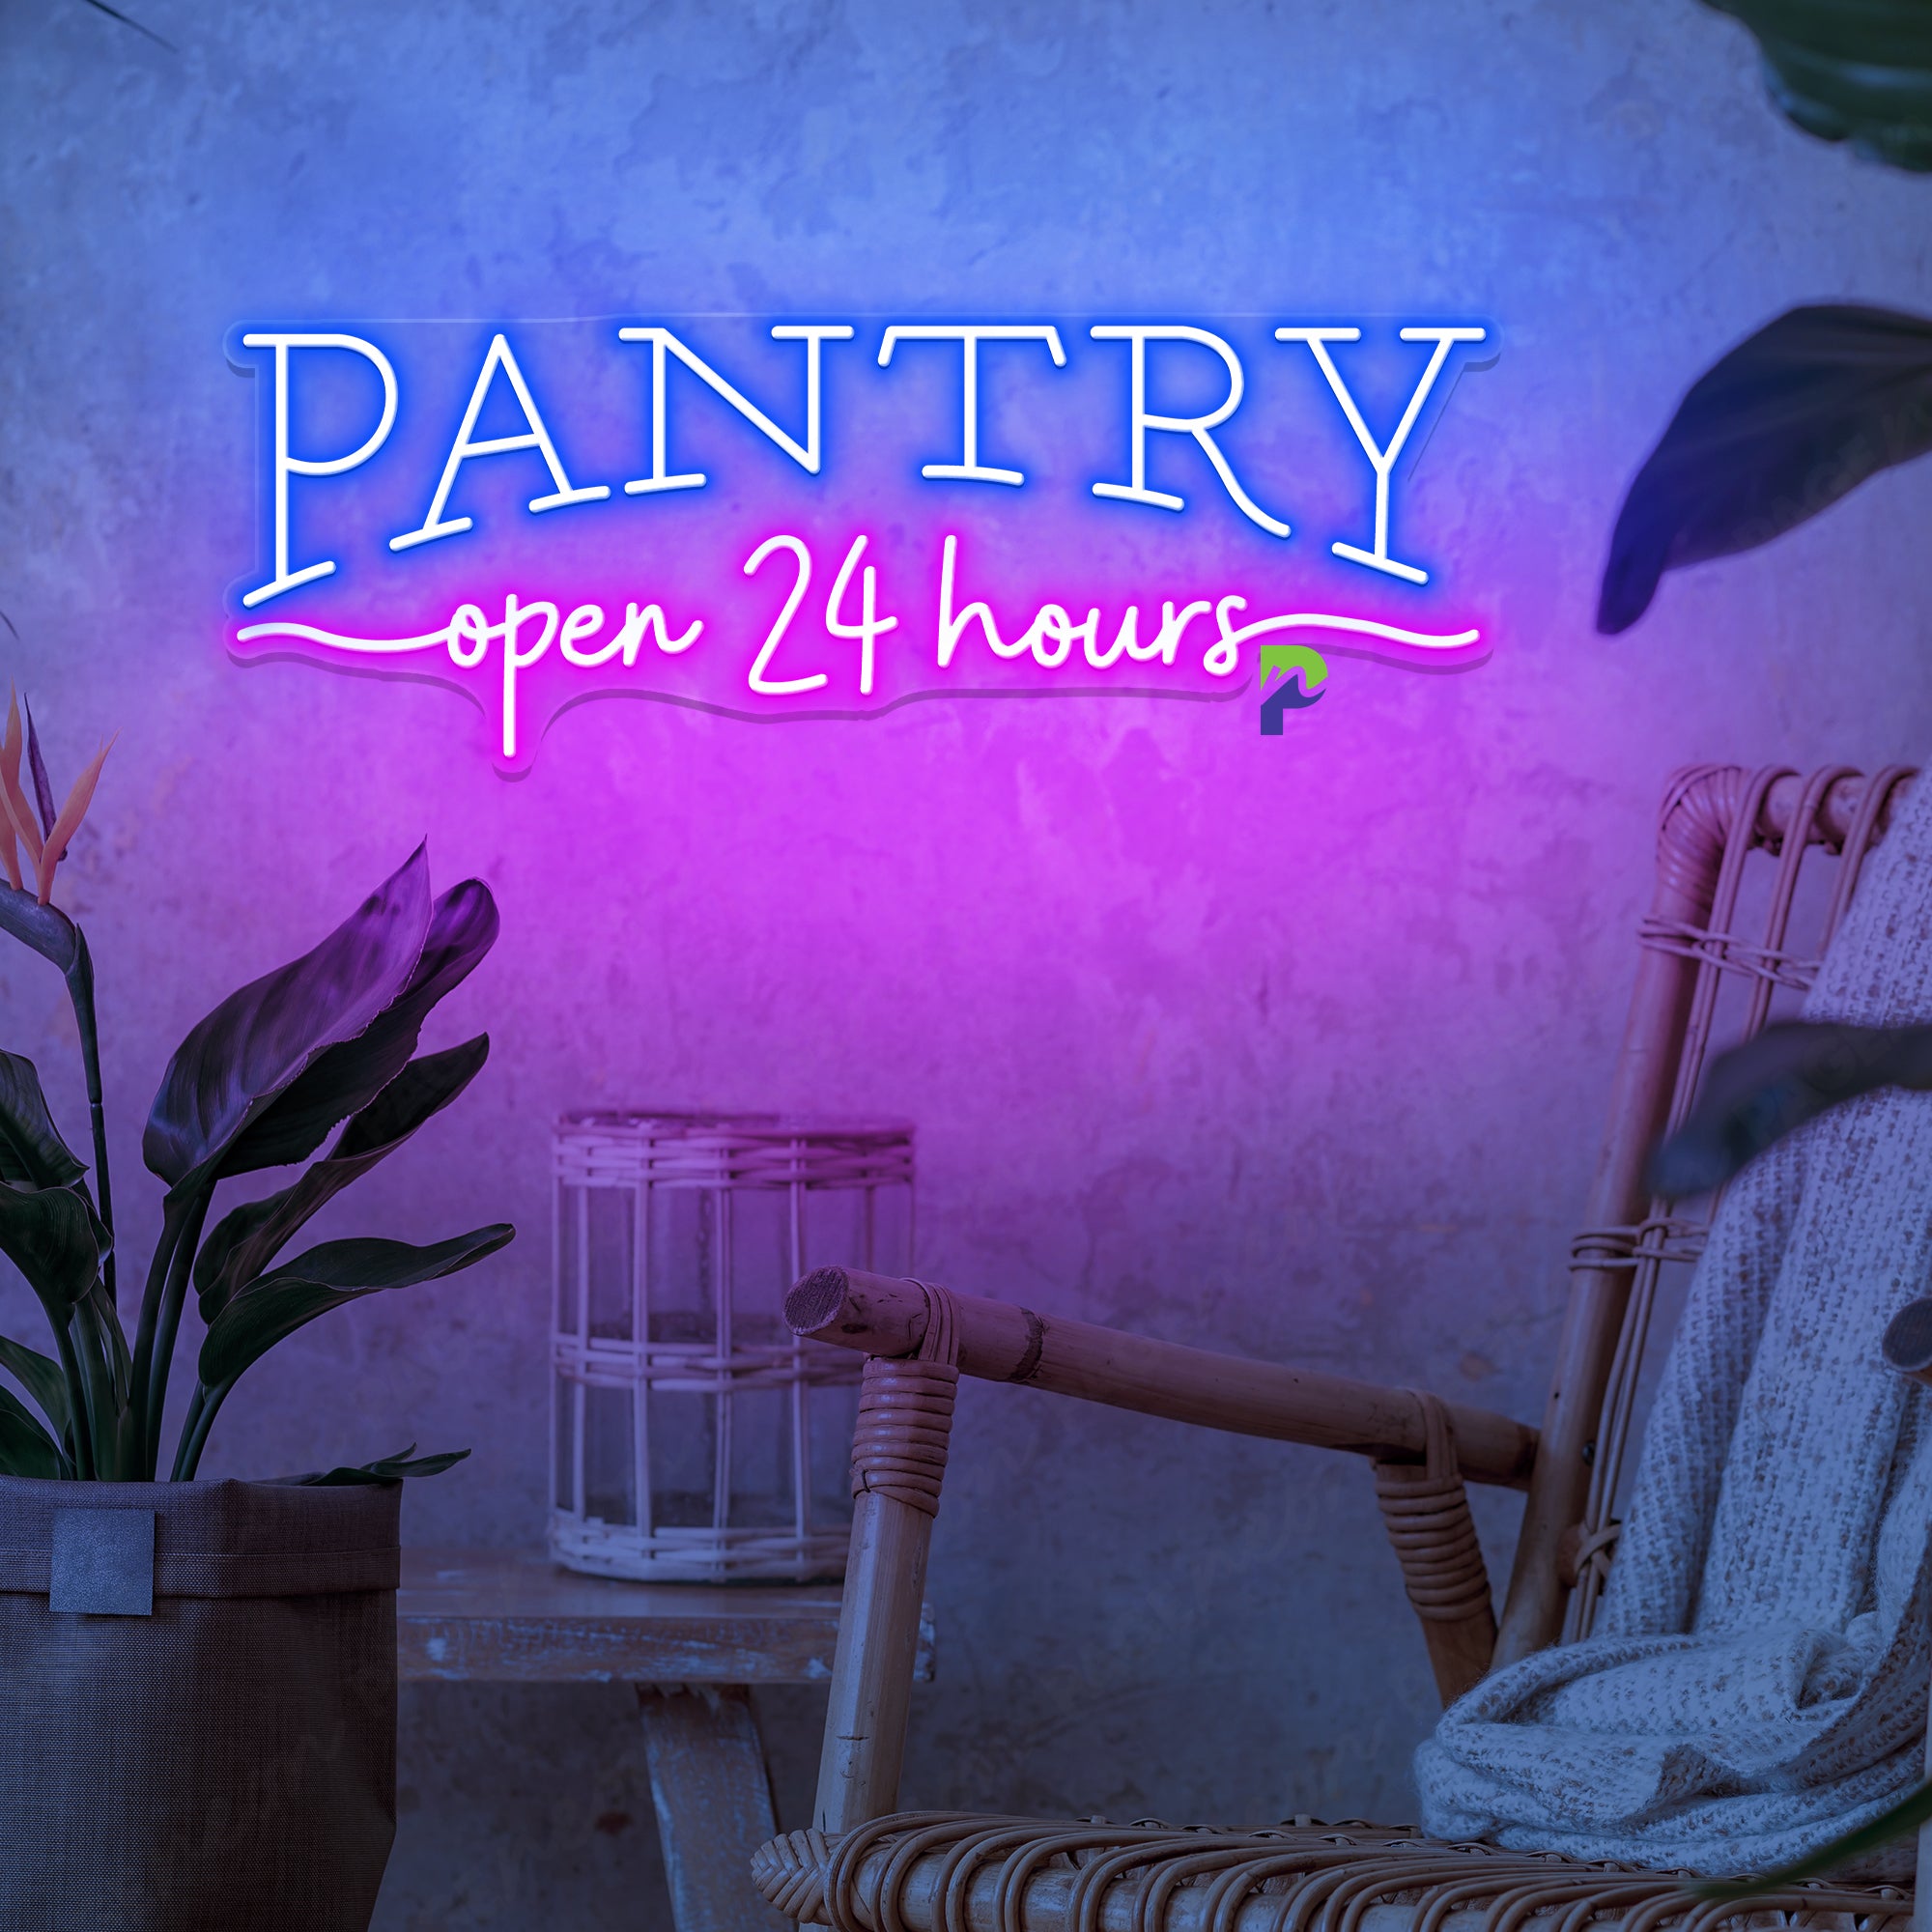 Pantry Neon Sign Open 24 Hours Led Light